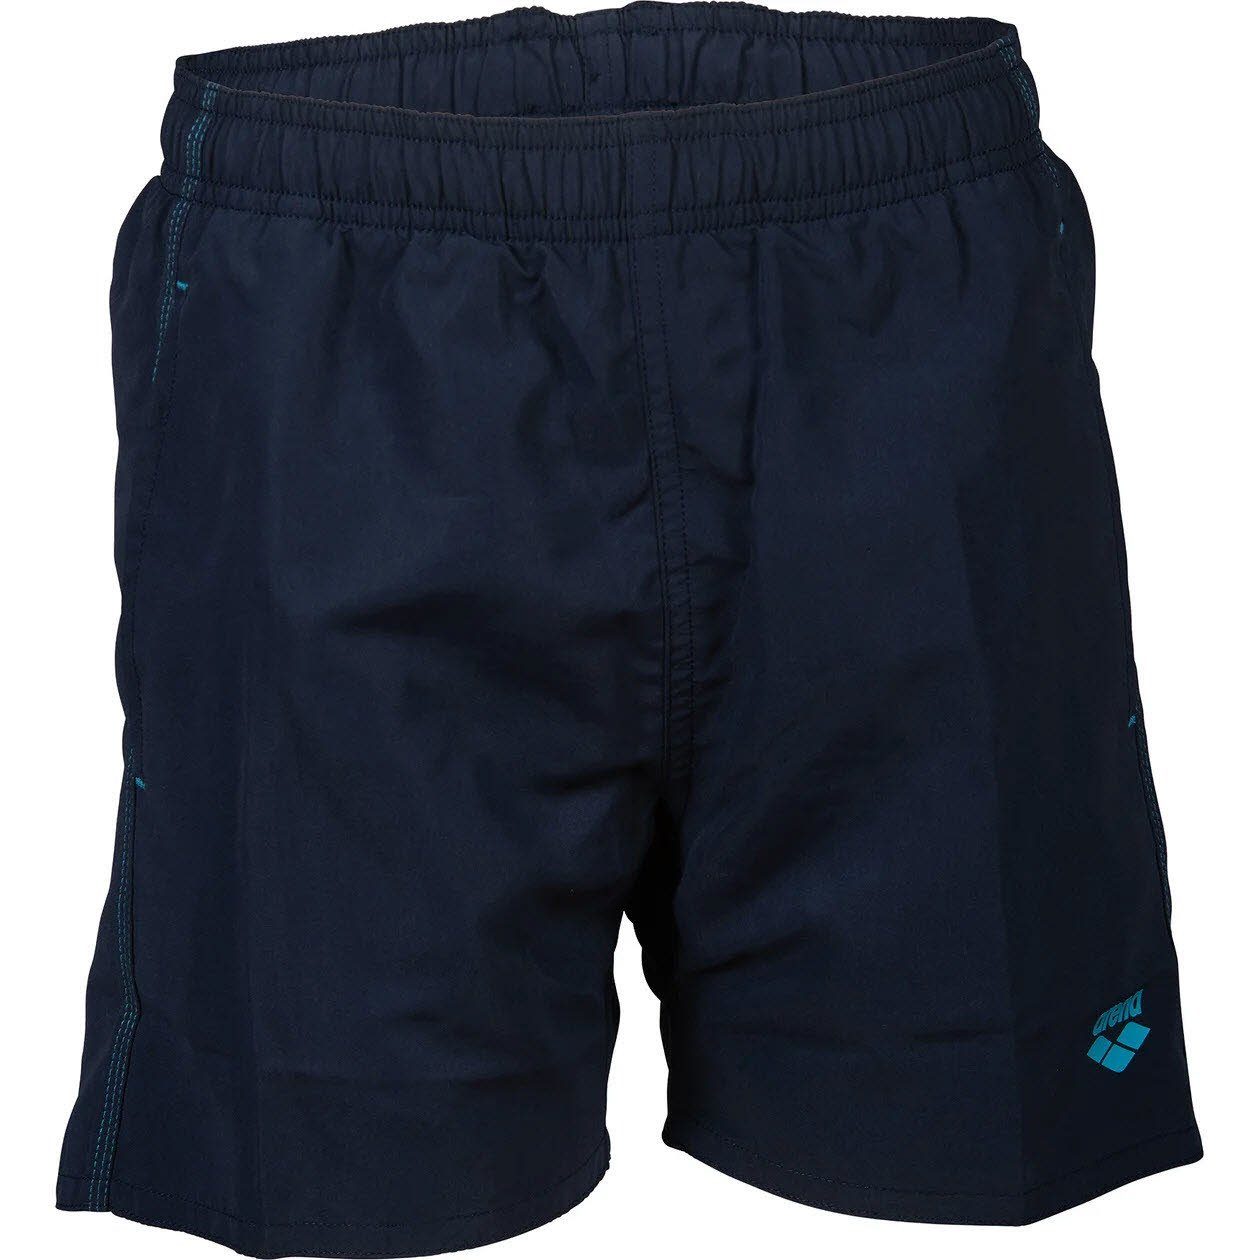 Arena Badeshorts BOYS' BEACH R BOXER SOLID 781 NAVY-TURQUOISE